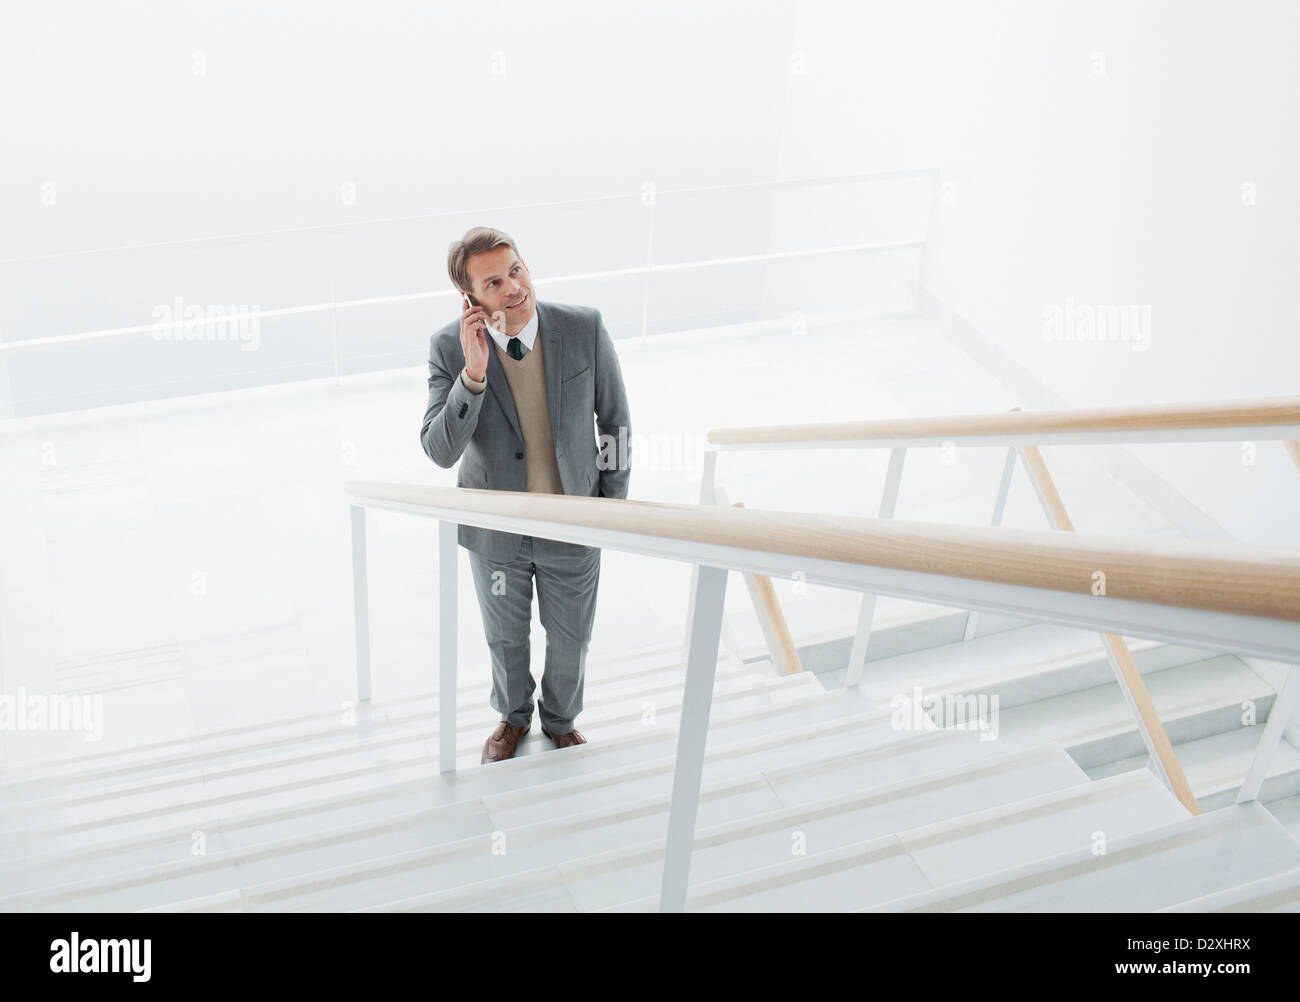 Businessman talking on cell phone at base of stairs Stock Photo